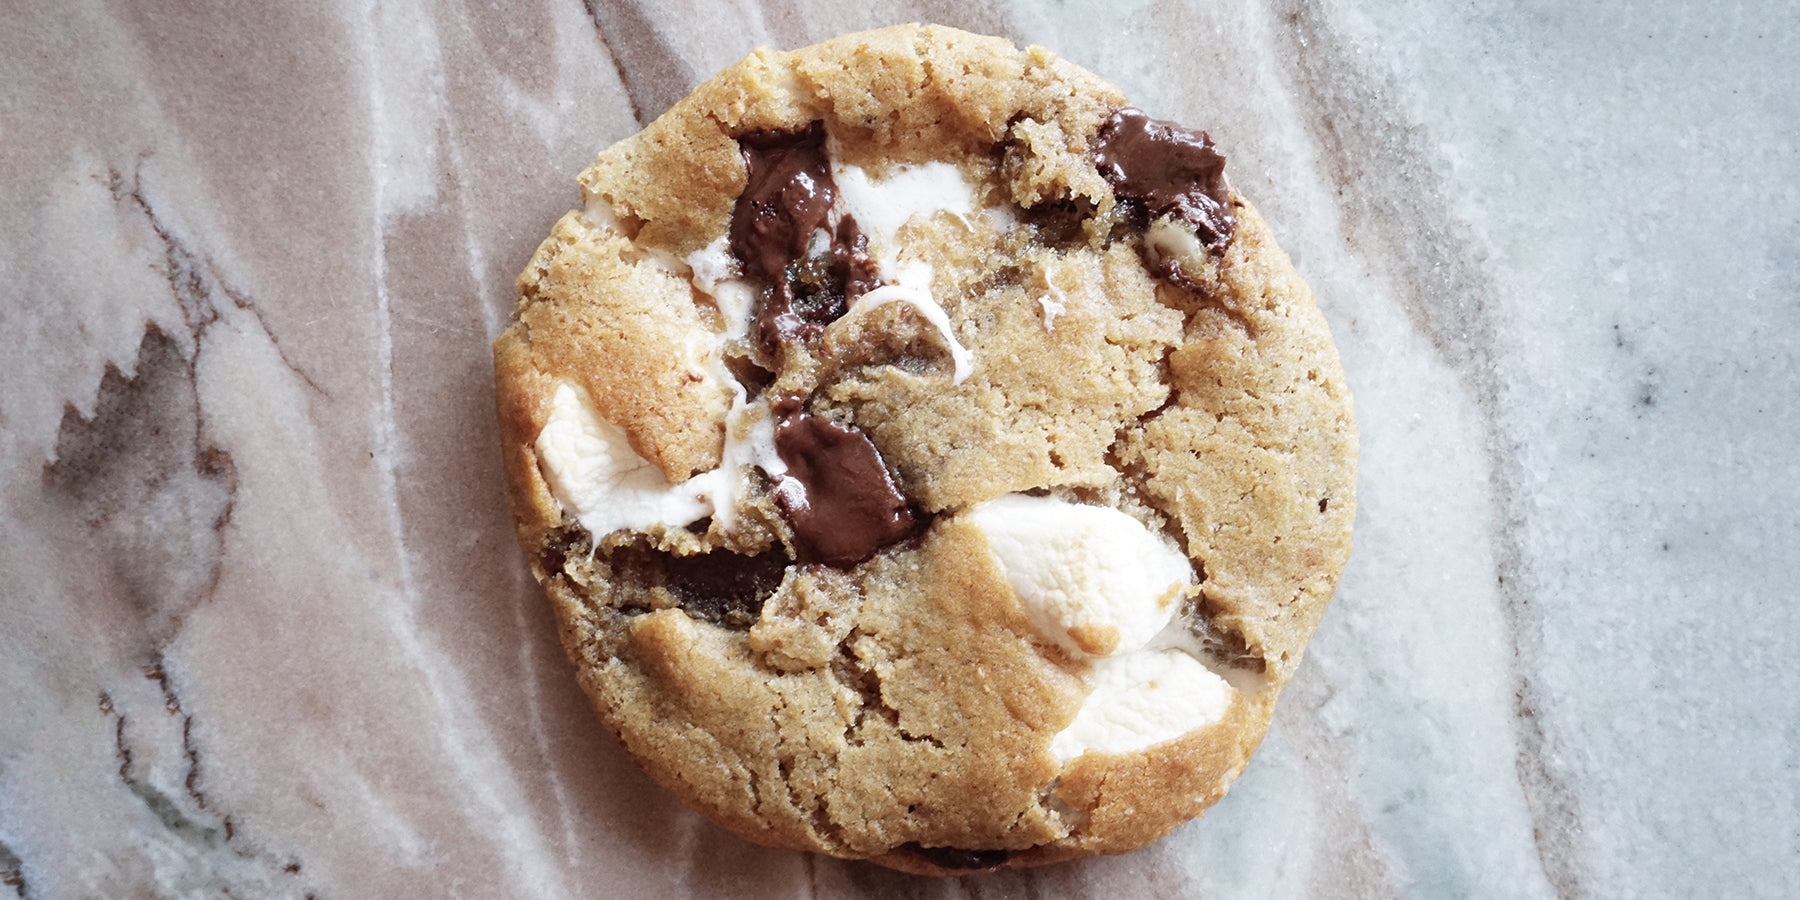 The Naughty Cookie Vegan Ooey Gooey S'mores Cookie! Consists of Marshmallows, Chocolate, and Graham Crackers. 